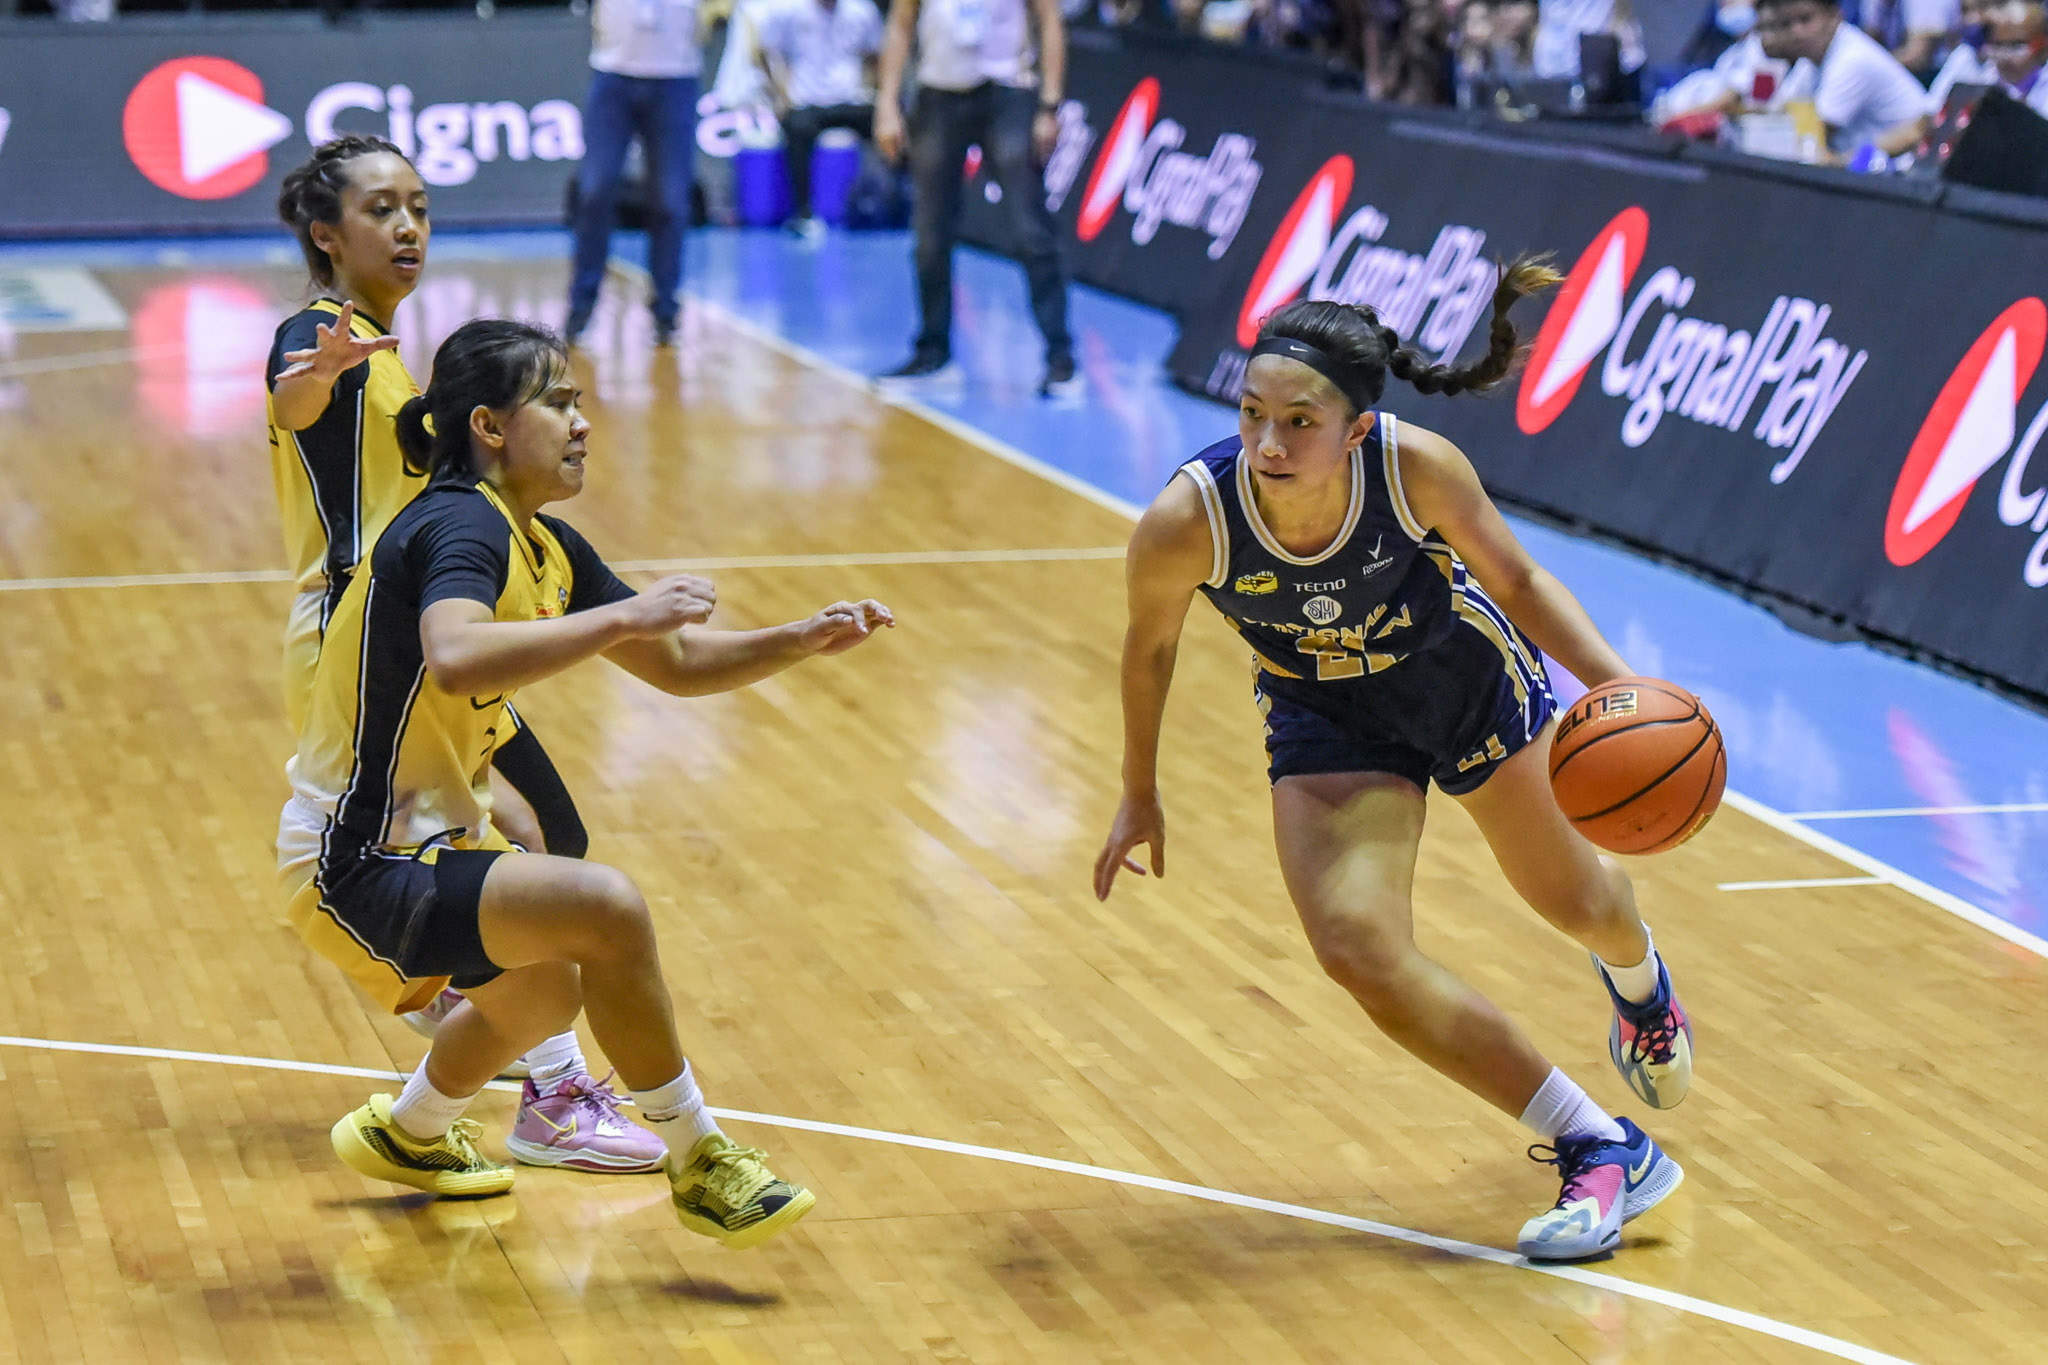 Camille Clarin (right) hopes that her fellow Lady Bulldogs learn from their recent close encounter with the Tigresses.—photo courtesy of UAAP MEDIA